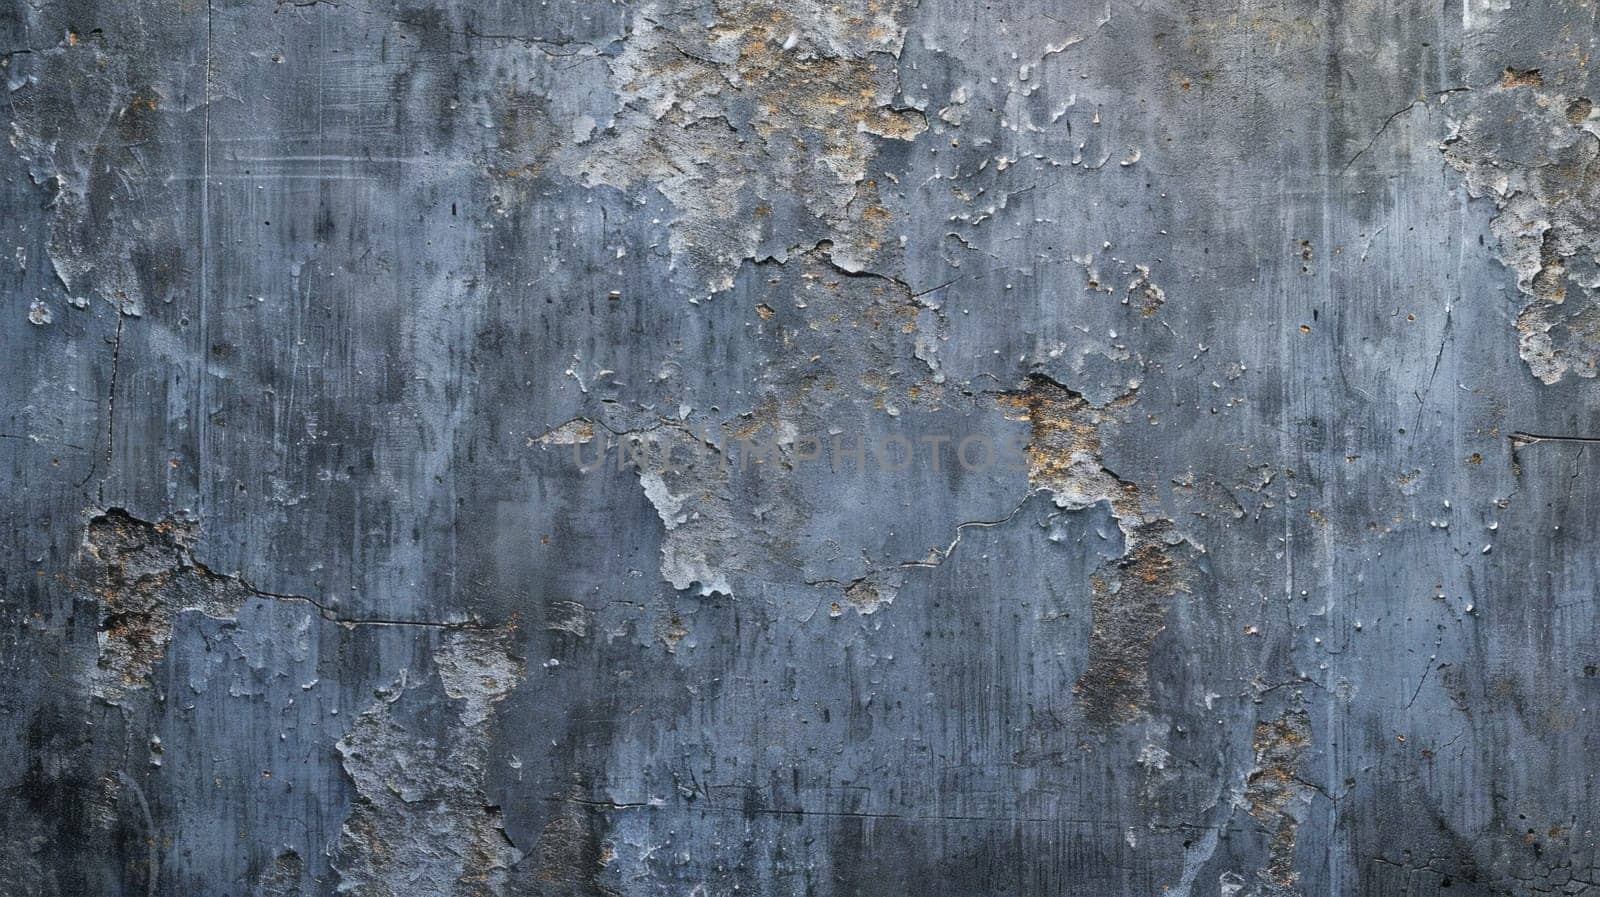 Grunge textured wall with peeling paint. Created using AI generated technology and image editing software.